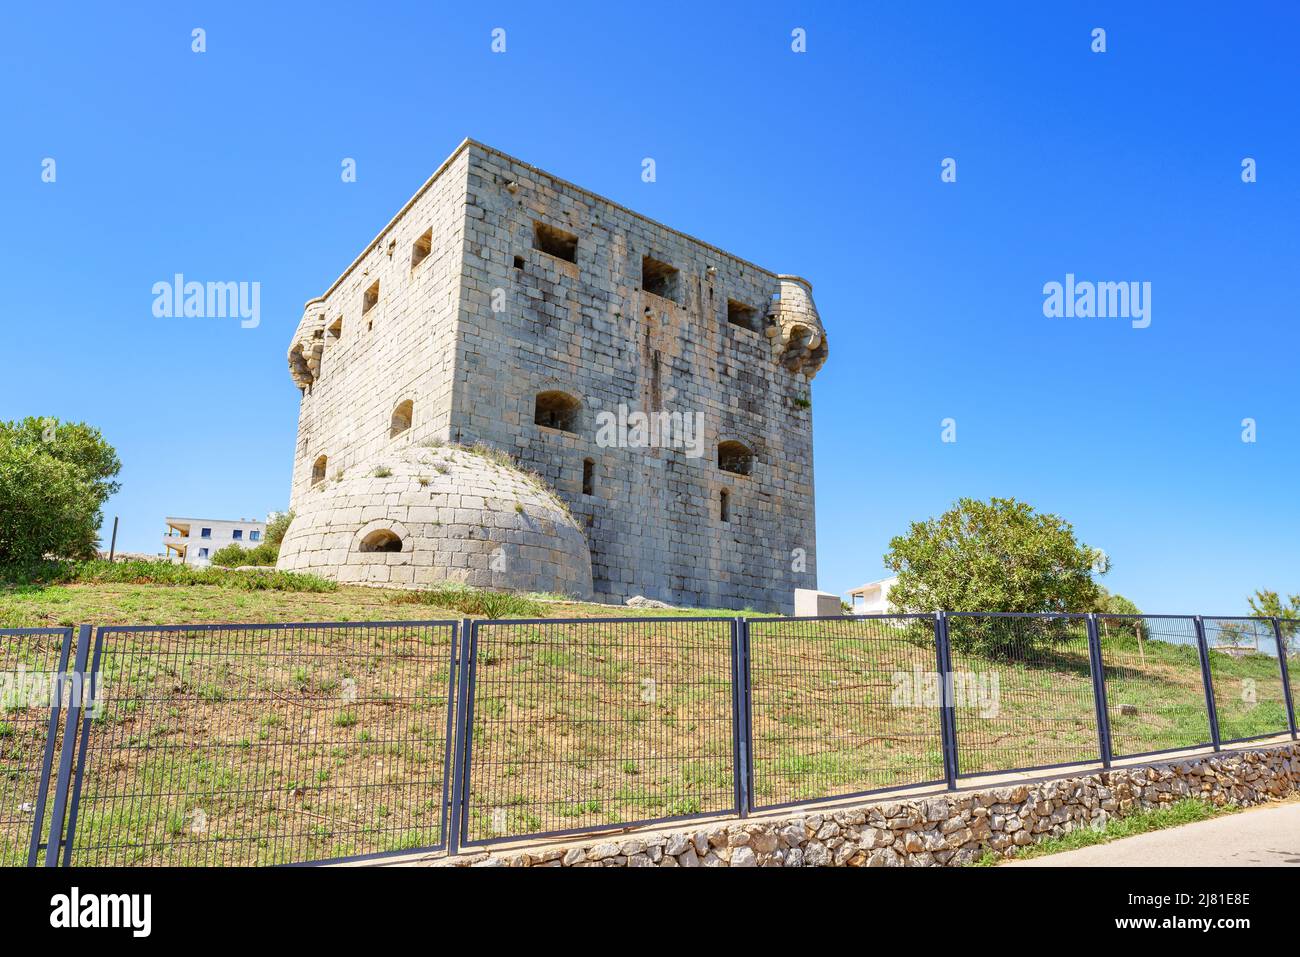 Medieval fortification in the Spanish Mediterranean coast known as Torre del Rey in Oropesa del Mar, Region of Valencia, Spain Stock Photo